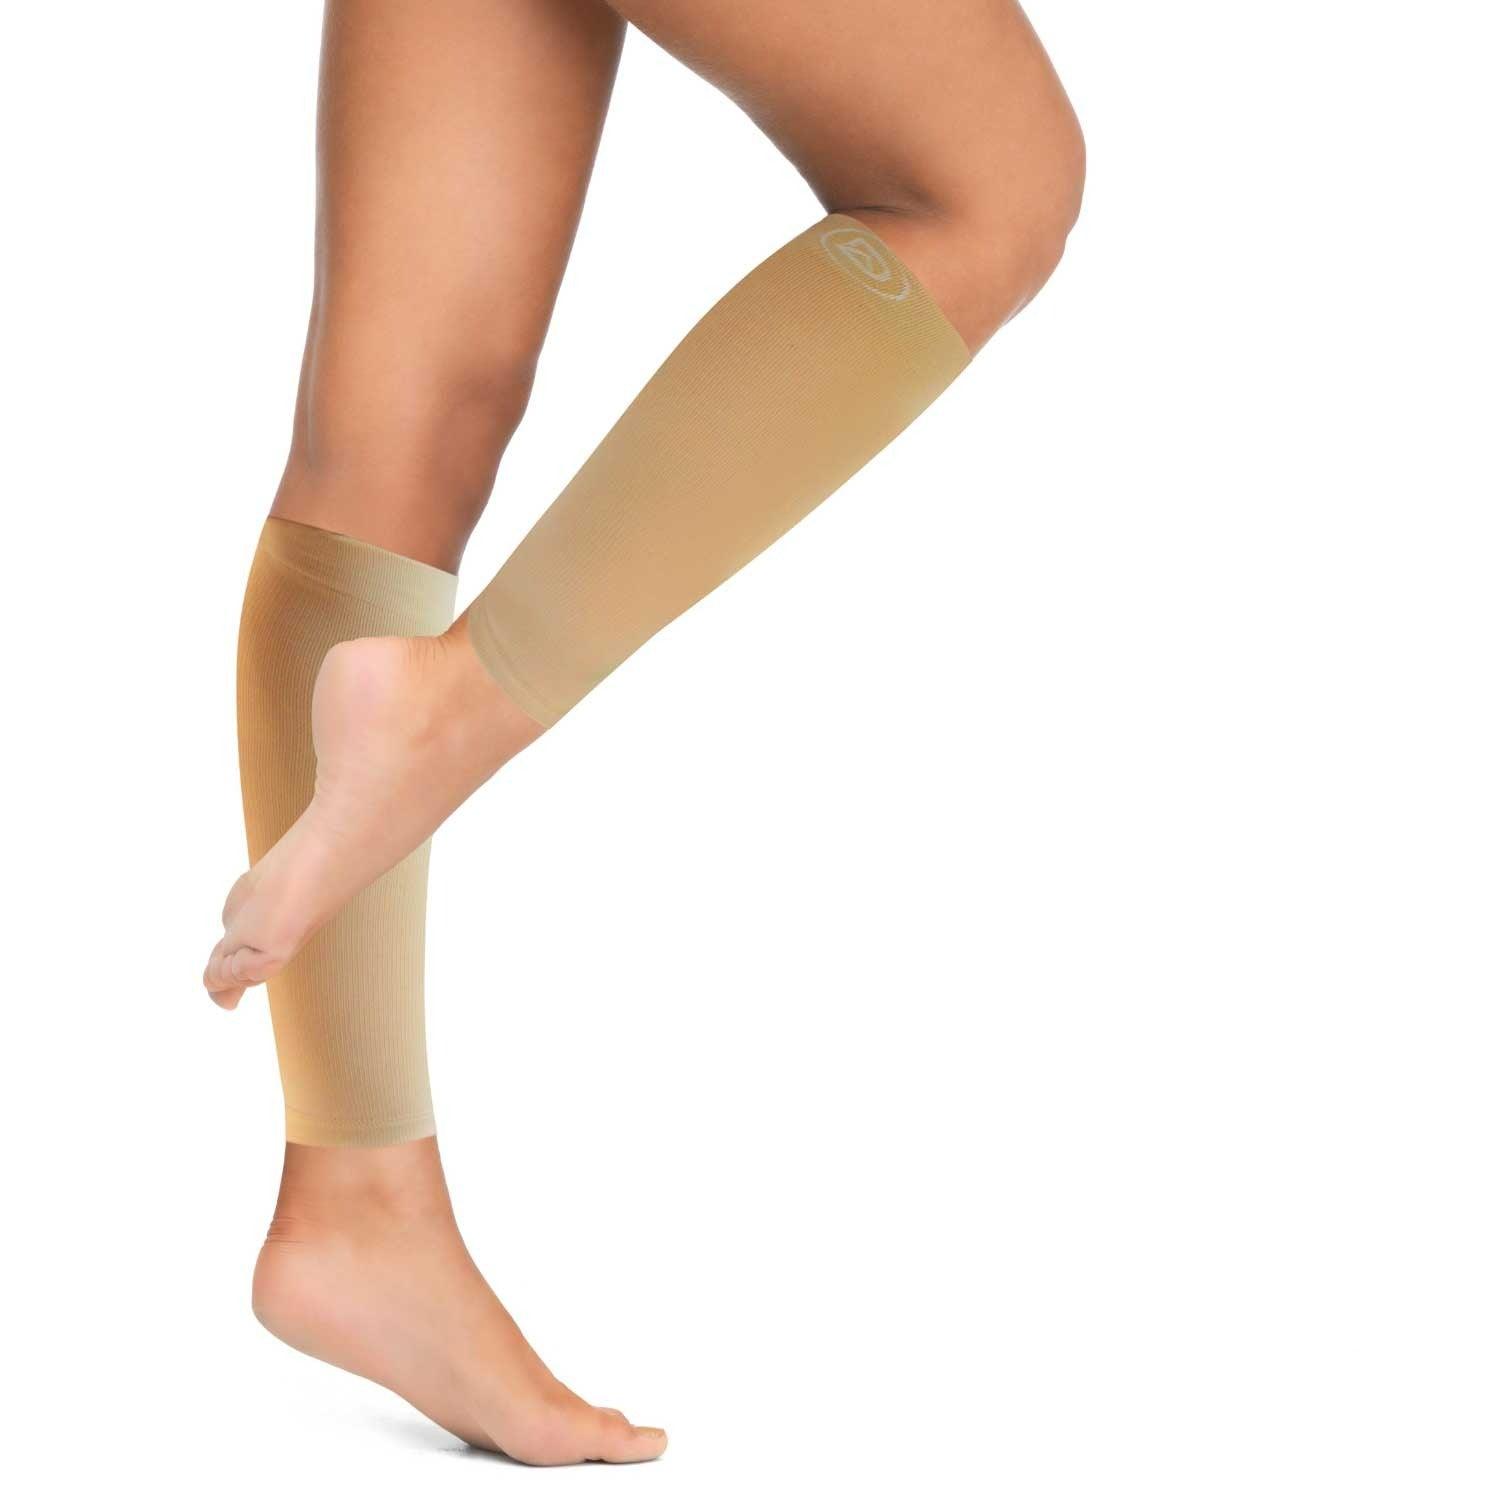  Plus Size Compression Sleeves for Calves Women Wide